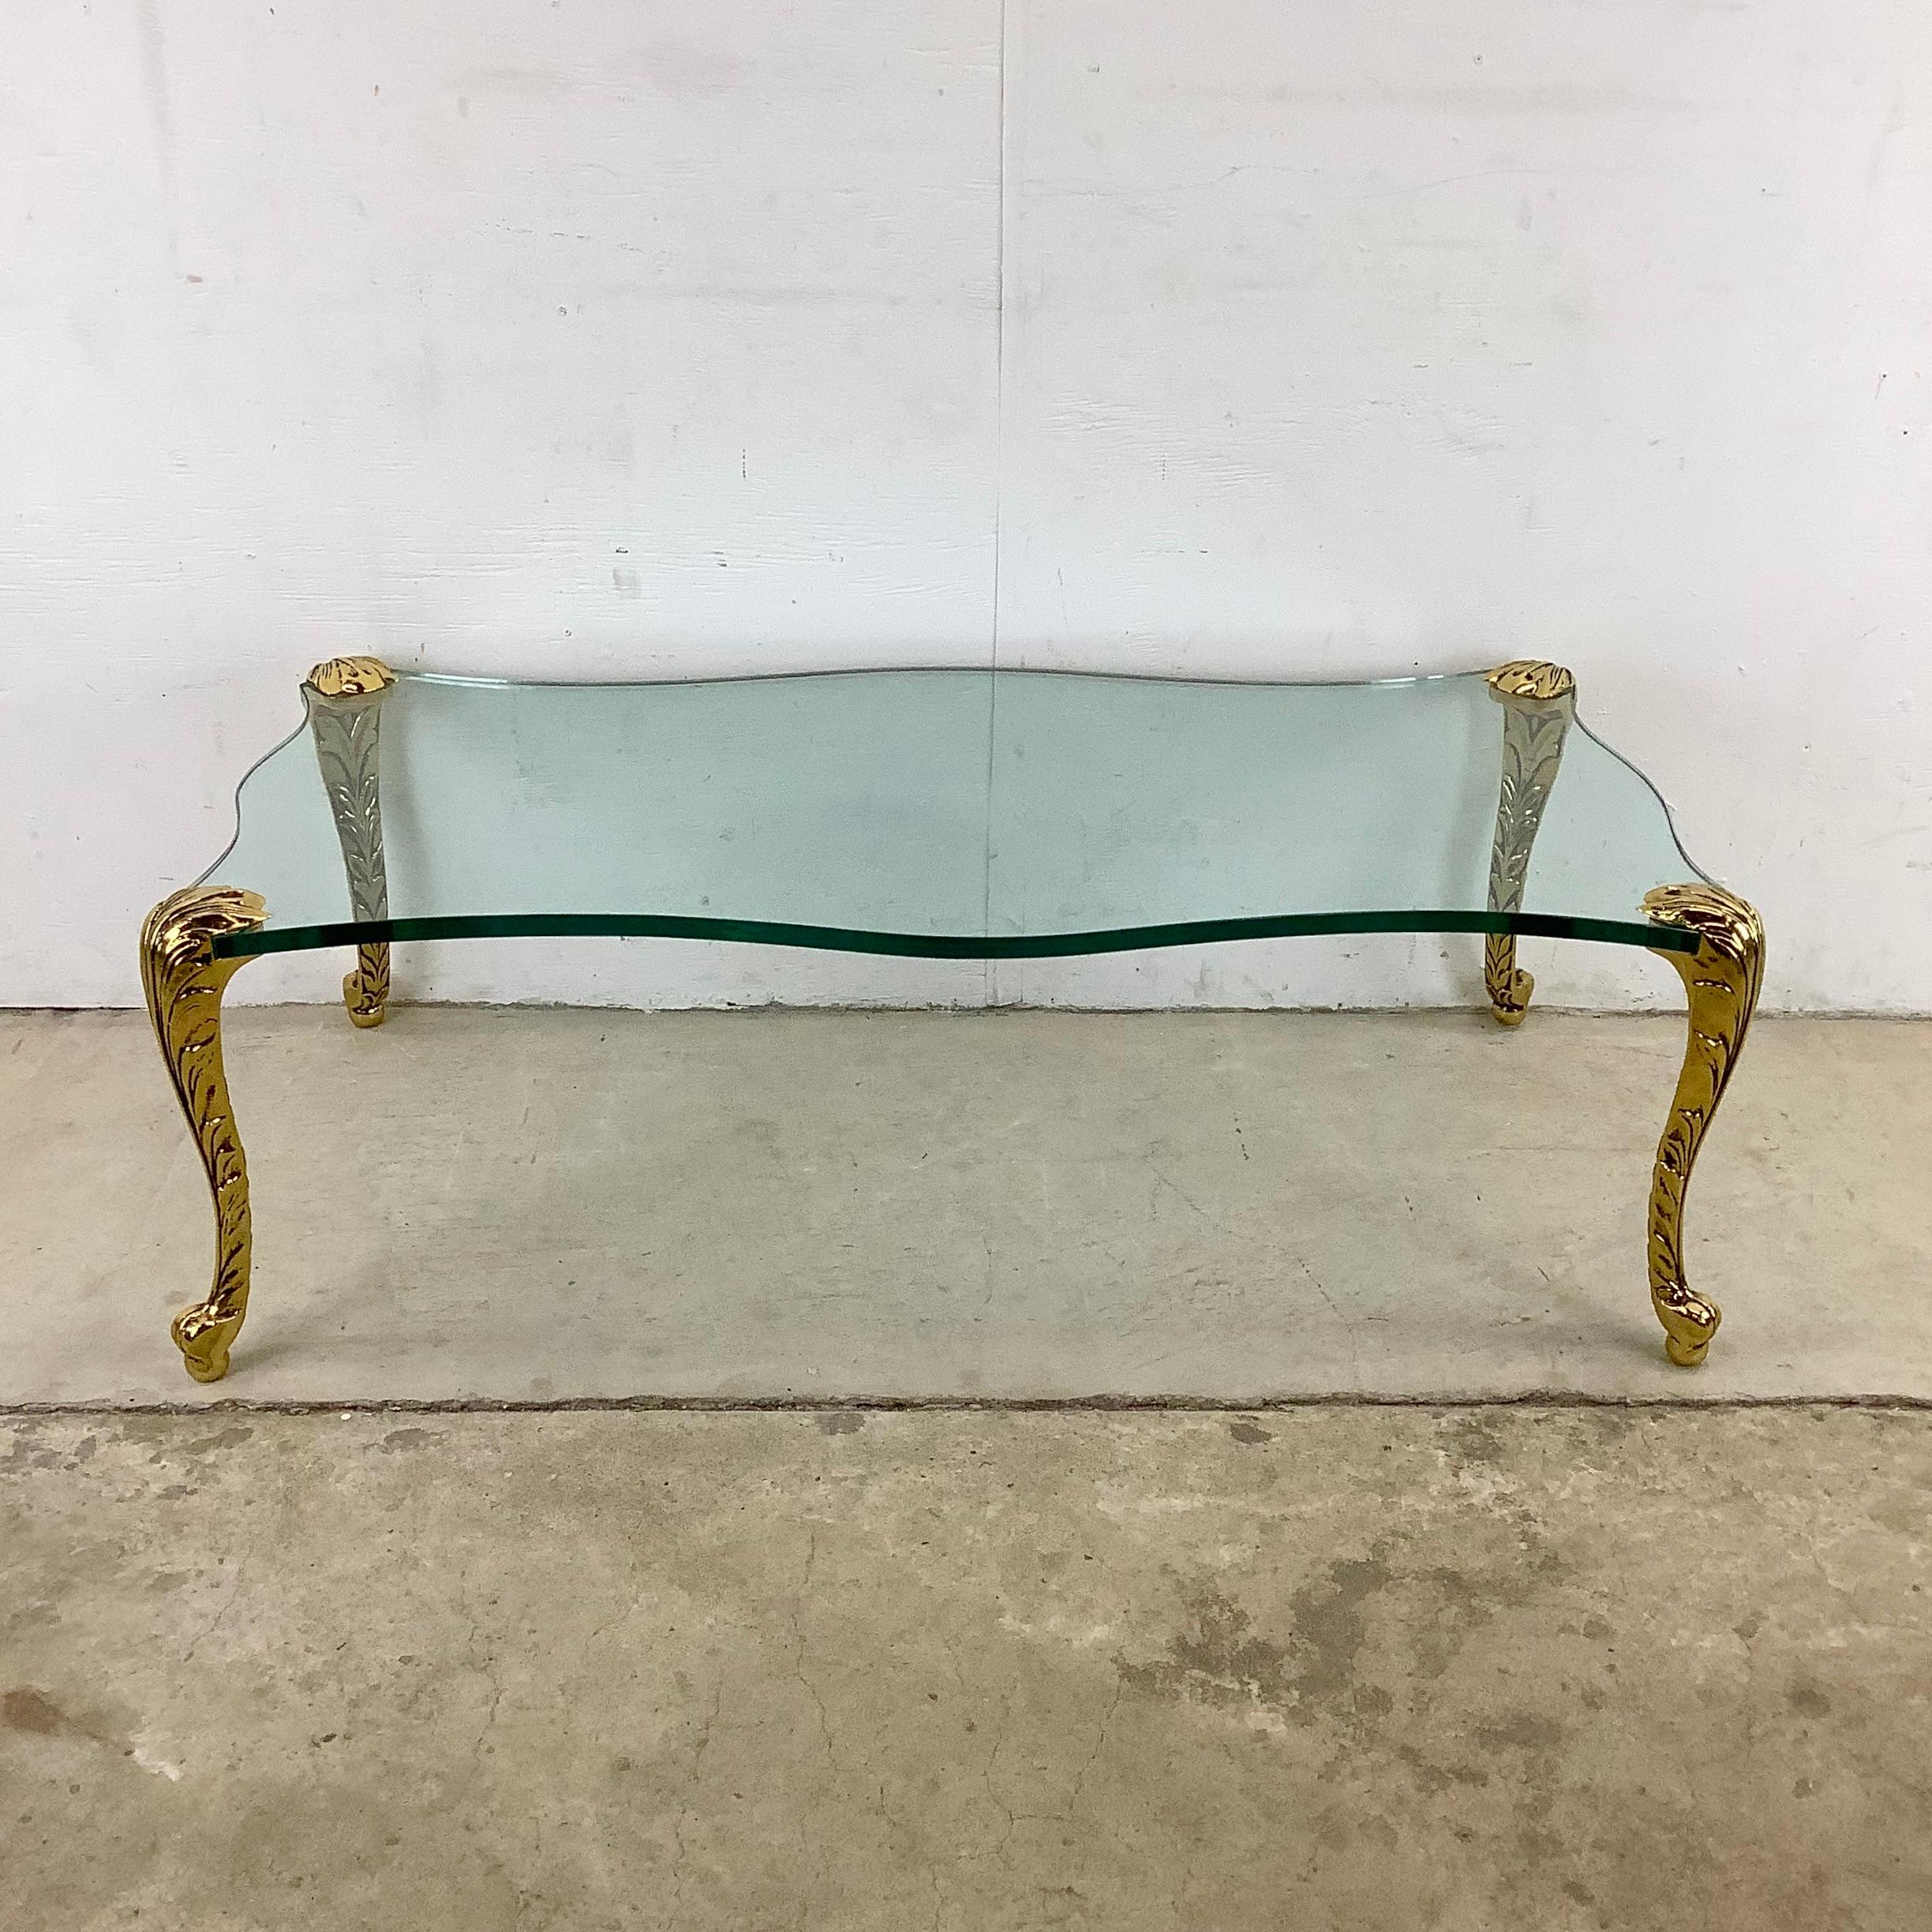 Introducing this vintage P.E. Guerin-Style Gilt Coffee Table, a luxurious and captivating piece that will add a touch of elegance and grandeur to your living space.

In the style of P.E. Guerin, a renowned French bronze manufacturer, this coffee